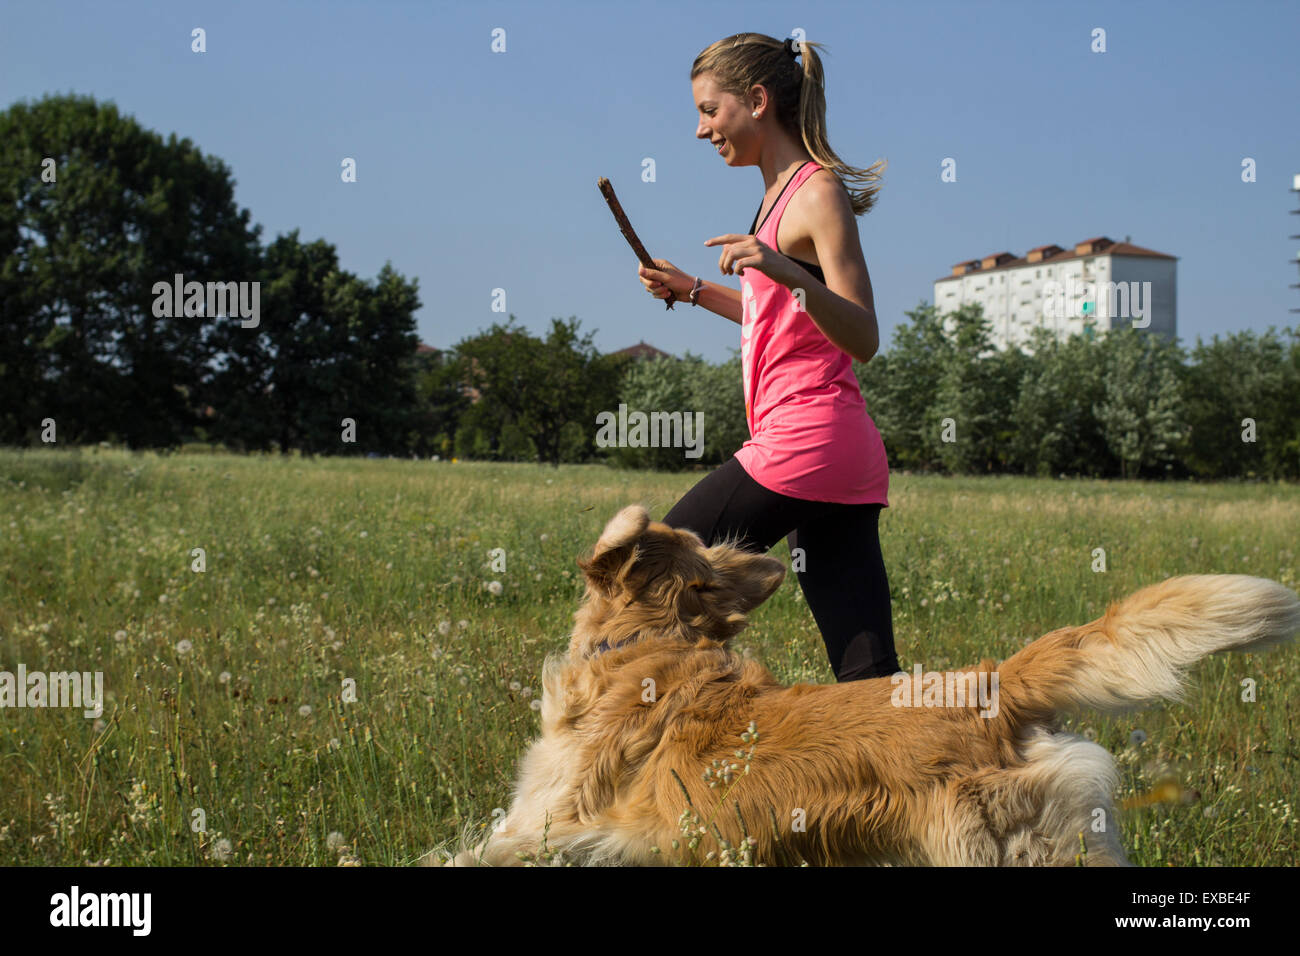 Blonde girl playing with her dog at the park Stock Photo